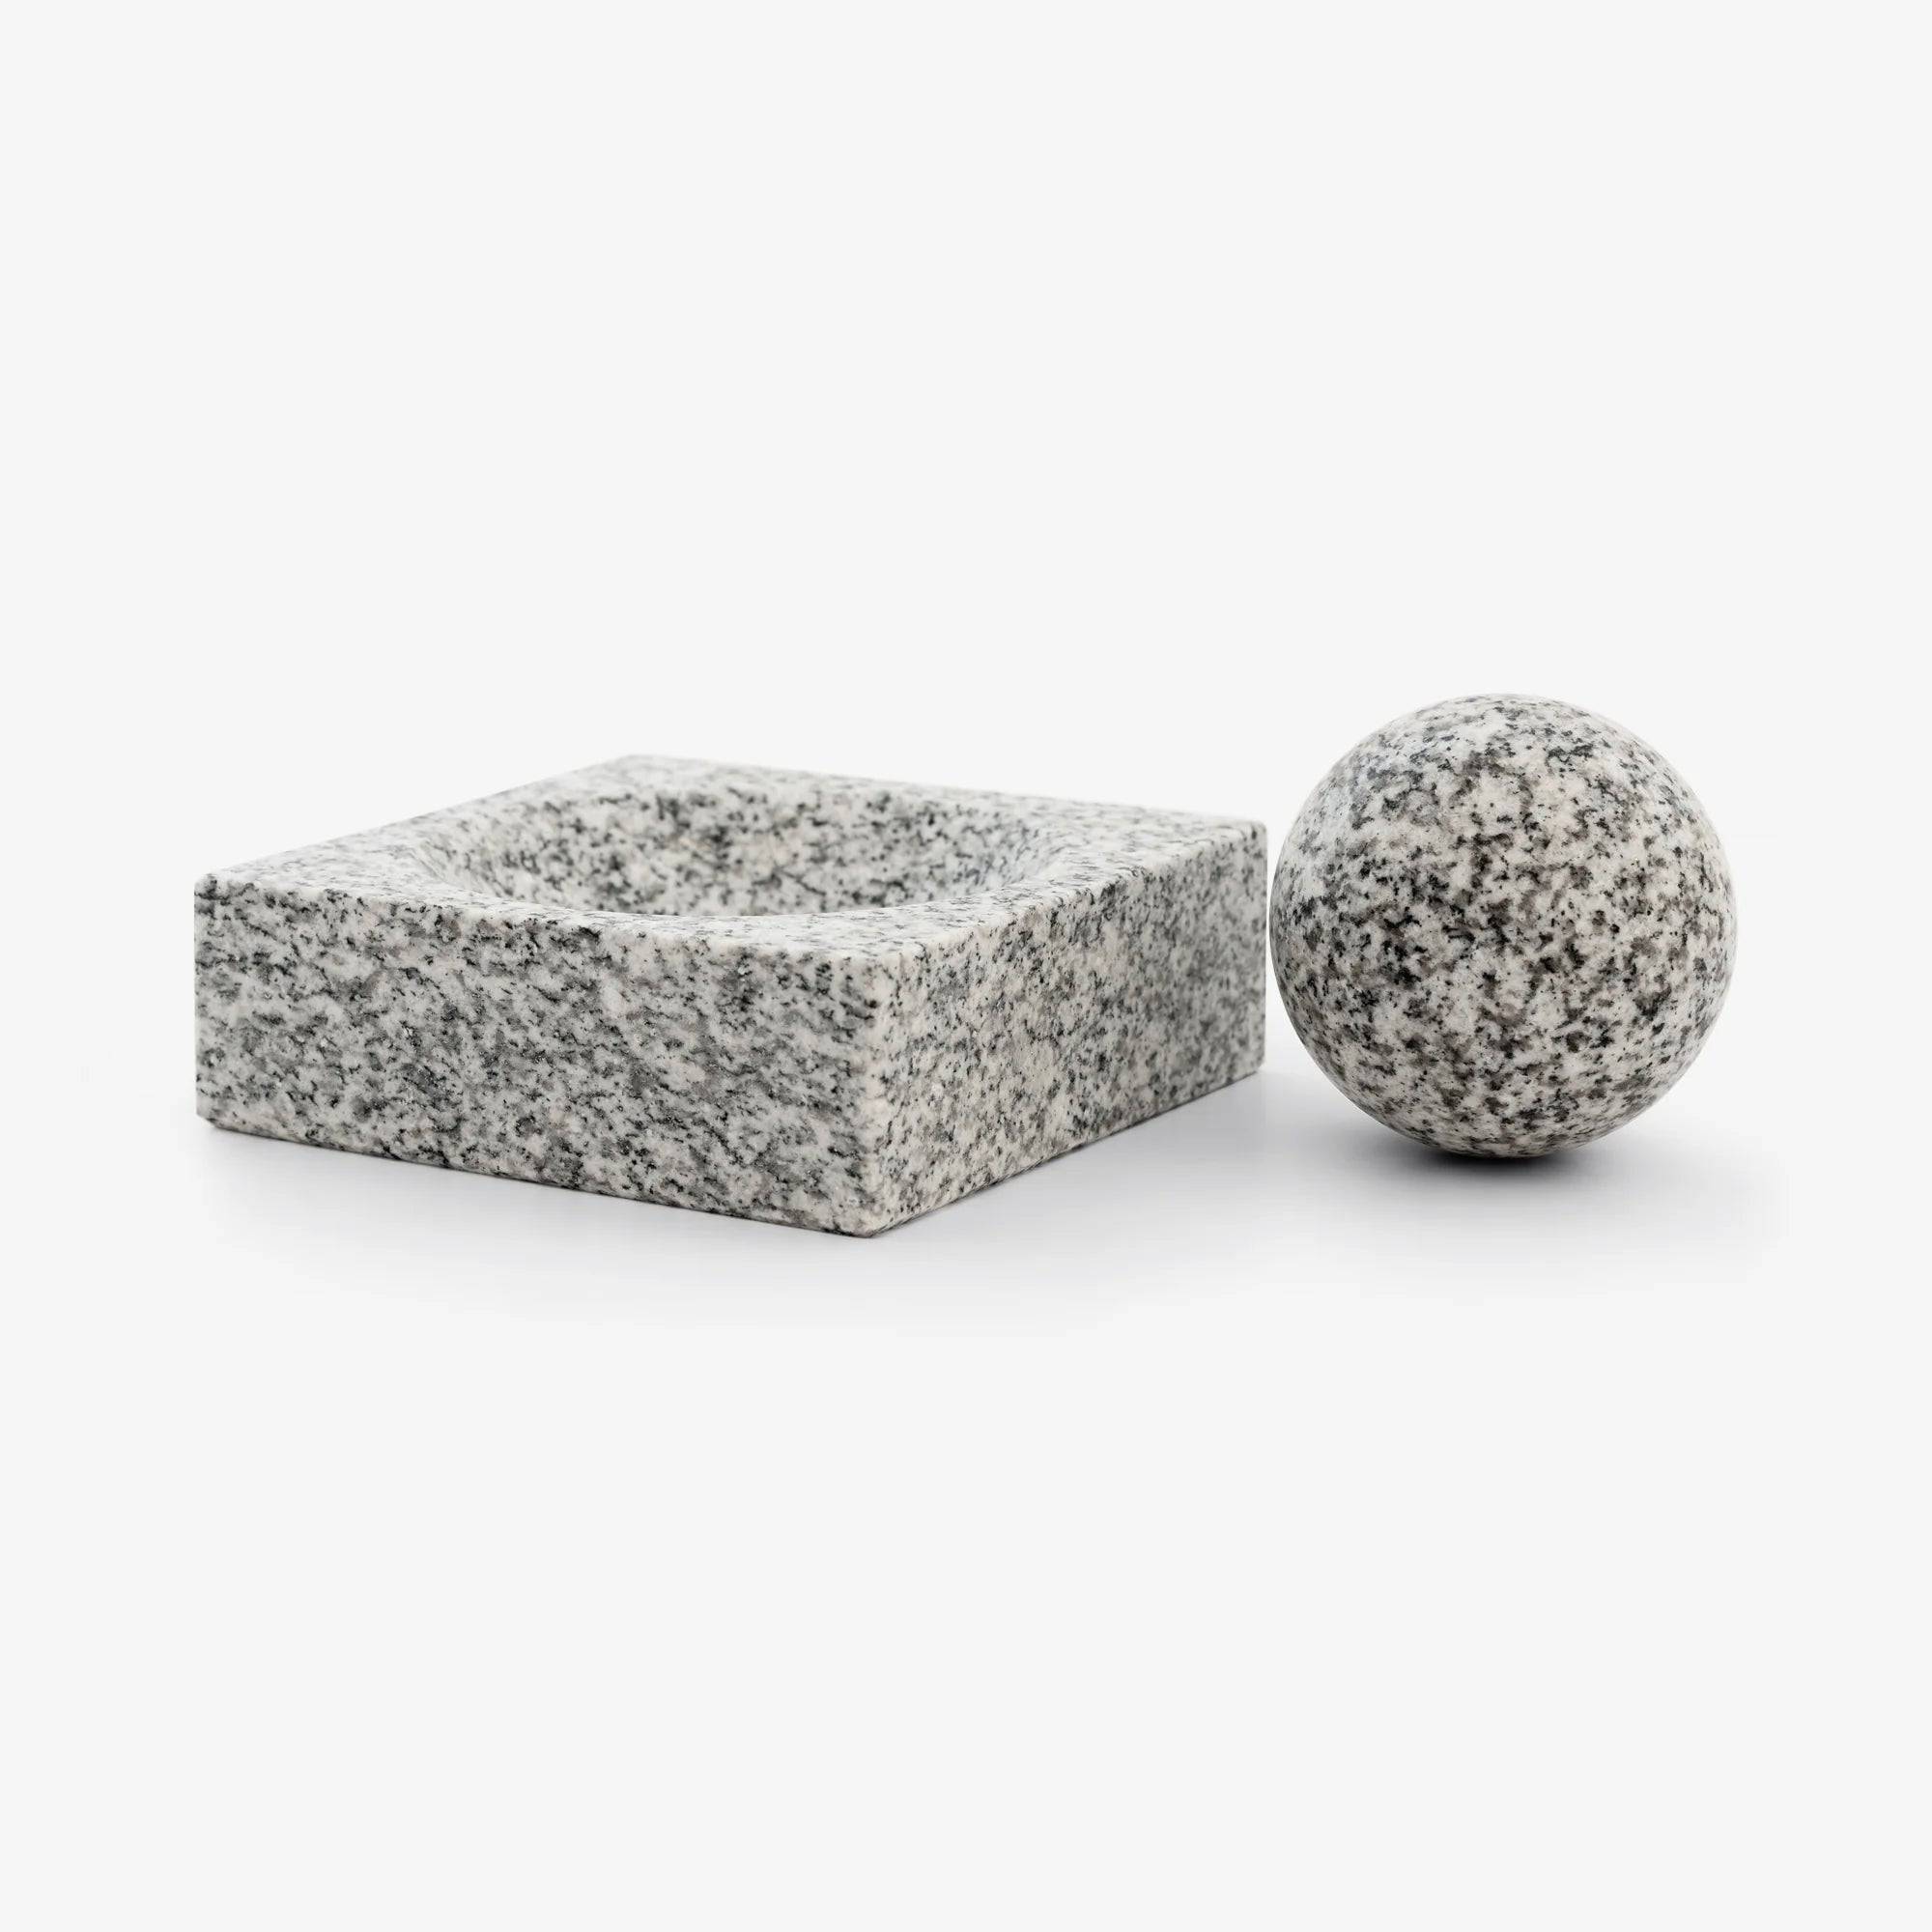 Orb Pestle and Mortar - THAT COOL LIVING